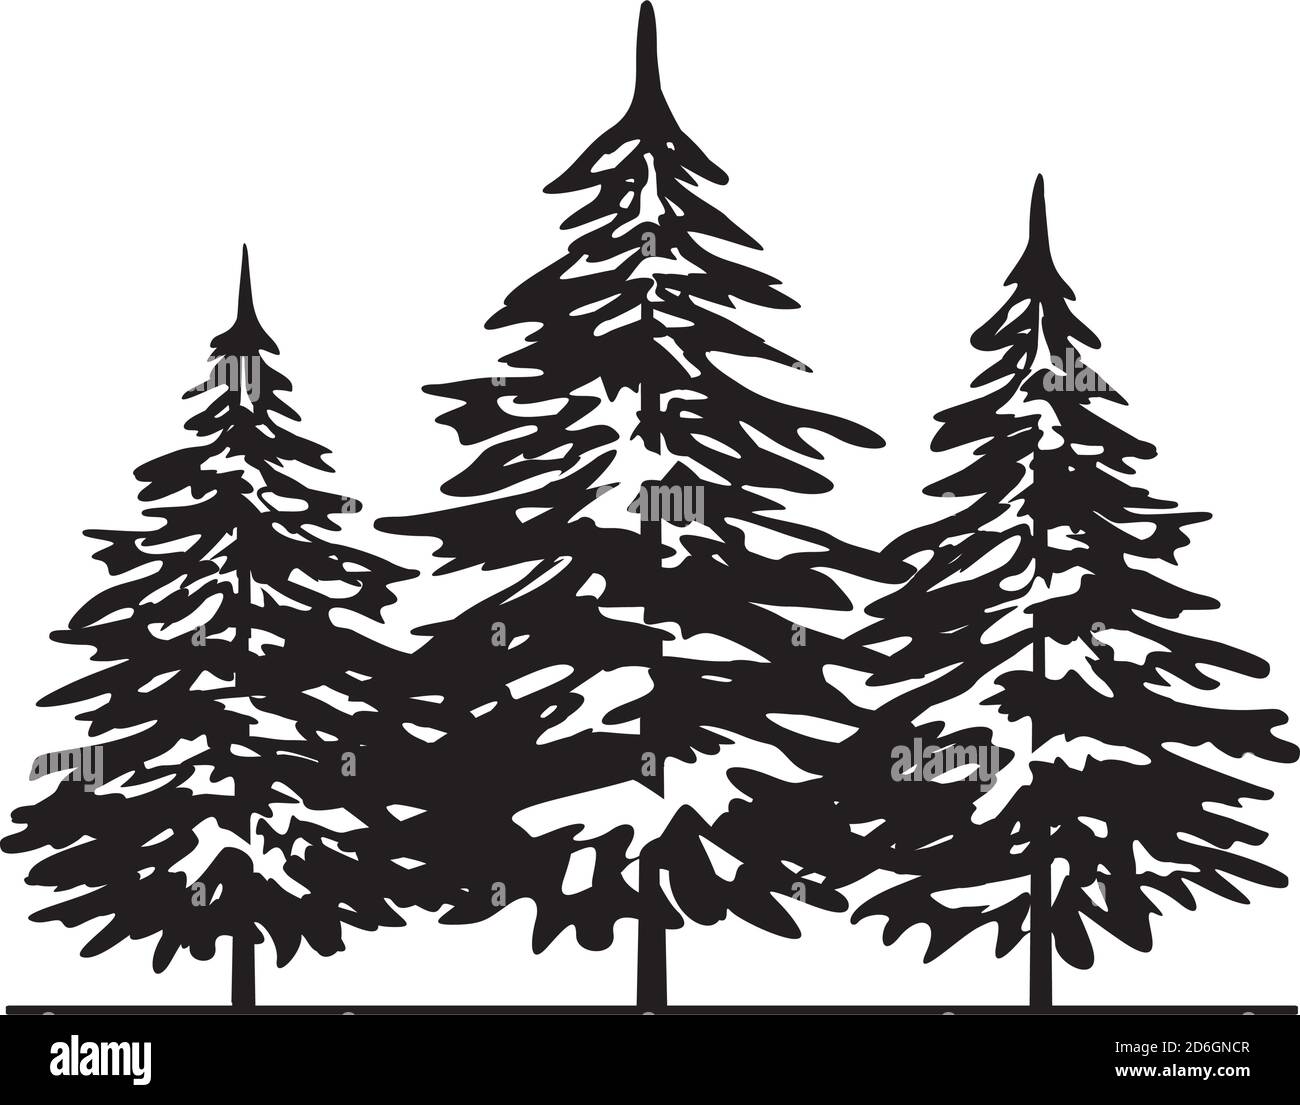 Black Spruce Trees. Winter season design elements and simply pictogram. Isolated vector xmas Icons and Illustration. Stock Vector